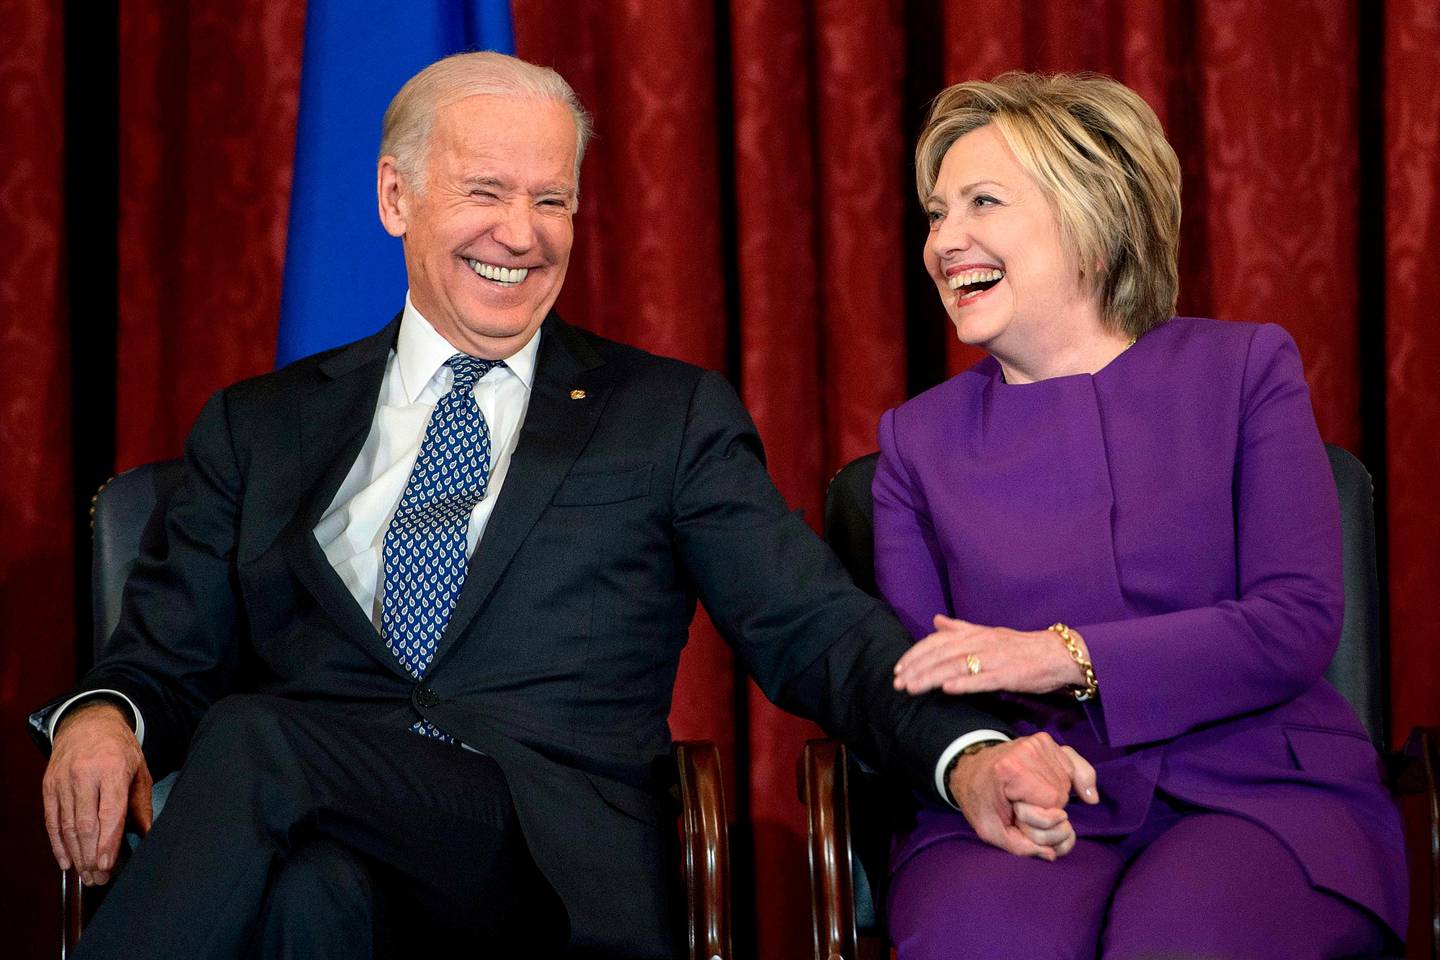 (FILES) In this file photo former US Vice President Joe R. Biden (L) and former Secretary of State Hillary Clinton laugh during a portrait unveiling for outgoing Senate Minority Leader Senator Harry Reid (D-NV) on Capitol Hill December 8, 2016 in Washington, DC. - Former Democratic presidential candidate Hillary Clinton is to hold a video conference with Joe Biden on April 28, 2020 during which she is expected to endorse his White House bid.
Clinton, who headed the Democratic ticket against Republican Donald Trump in 2016, announced on Twitter that she would be the "surprise guest" at a virtual town hall with Biden at 3:00 pm (1900 GMT) to discuss the impact of the coronavirus pandemic on women. (Photo by Brendan Smialowski / AFP)